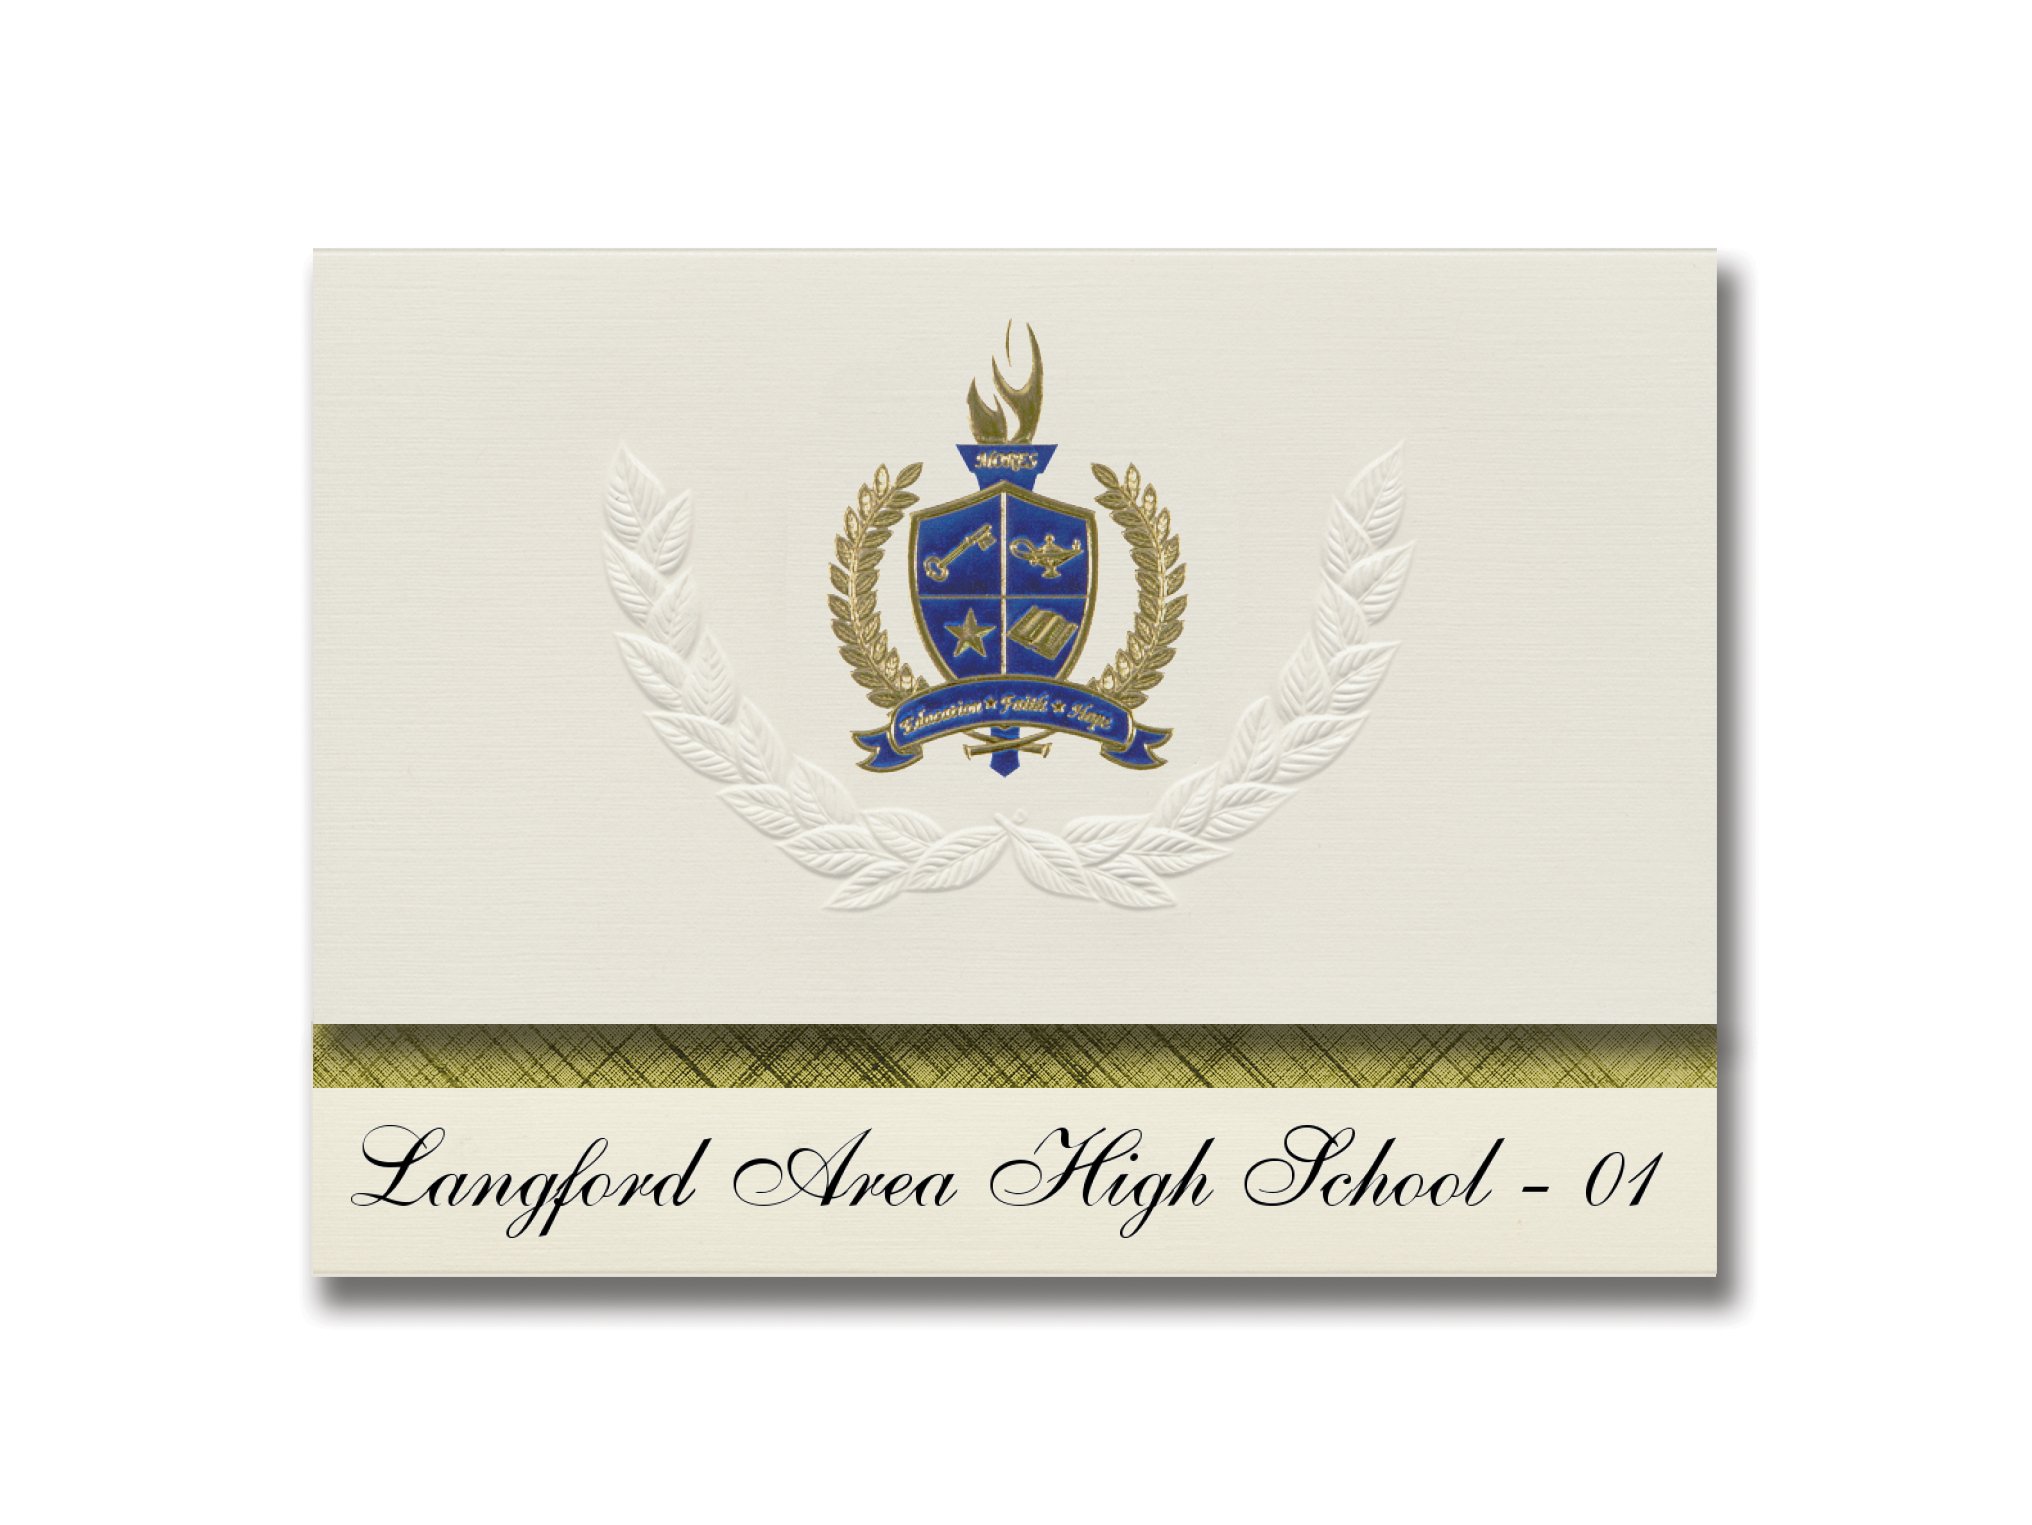 Signature Announcements Langford Area High School - 01 (Langford, SD) Graduation Announcements, Presidential style, Elite package of 25 with Gold &...